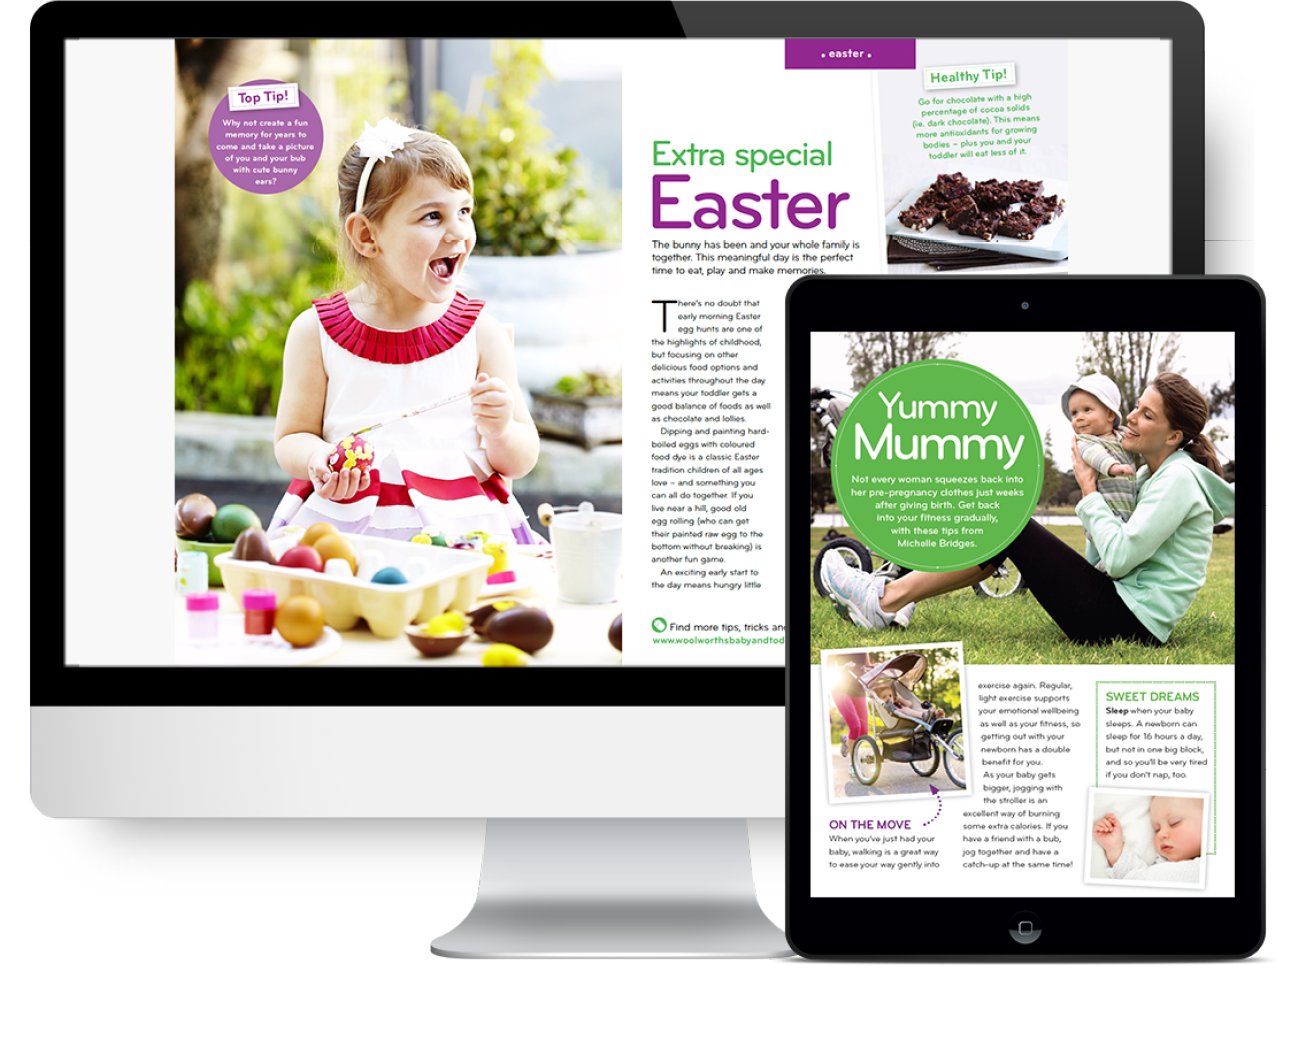 Woolworths e-guide - Design by Kristy